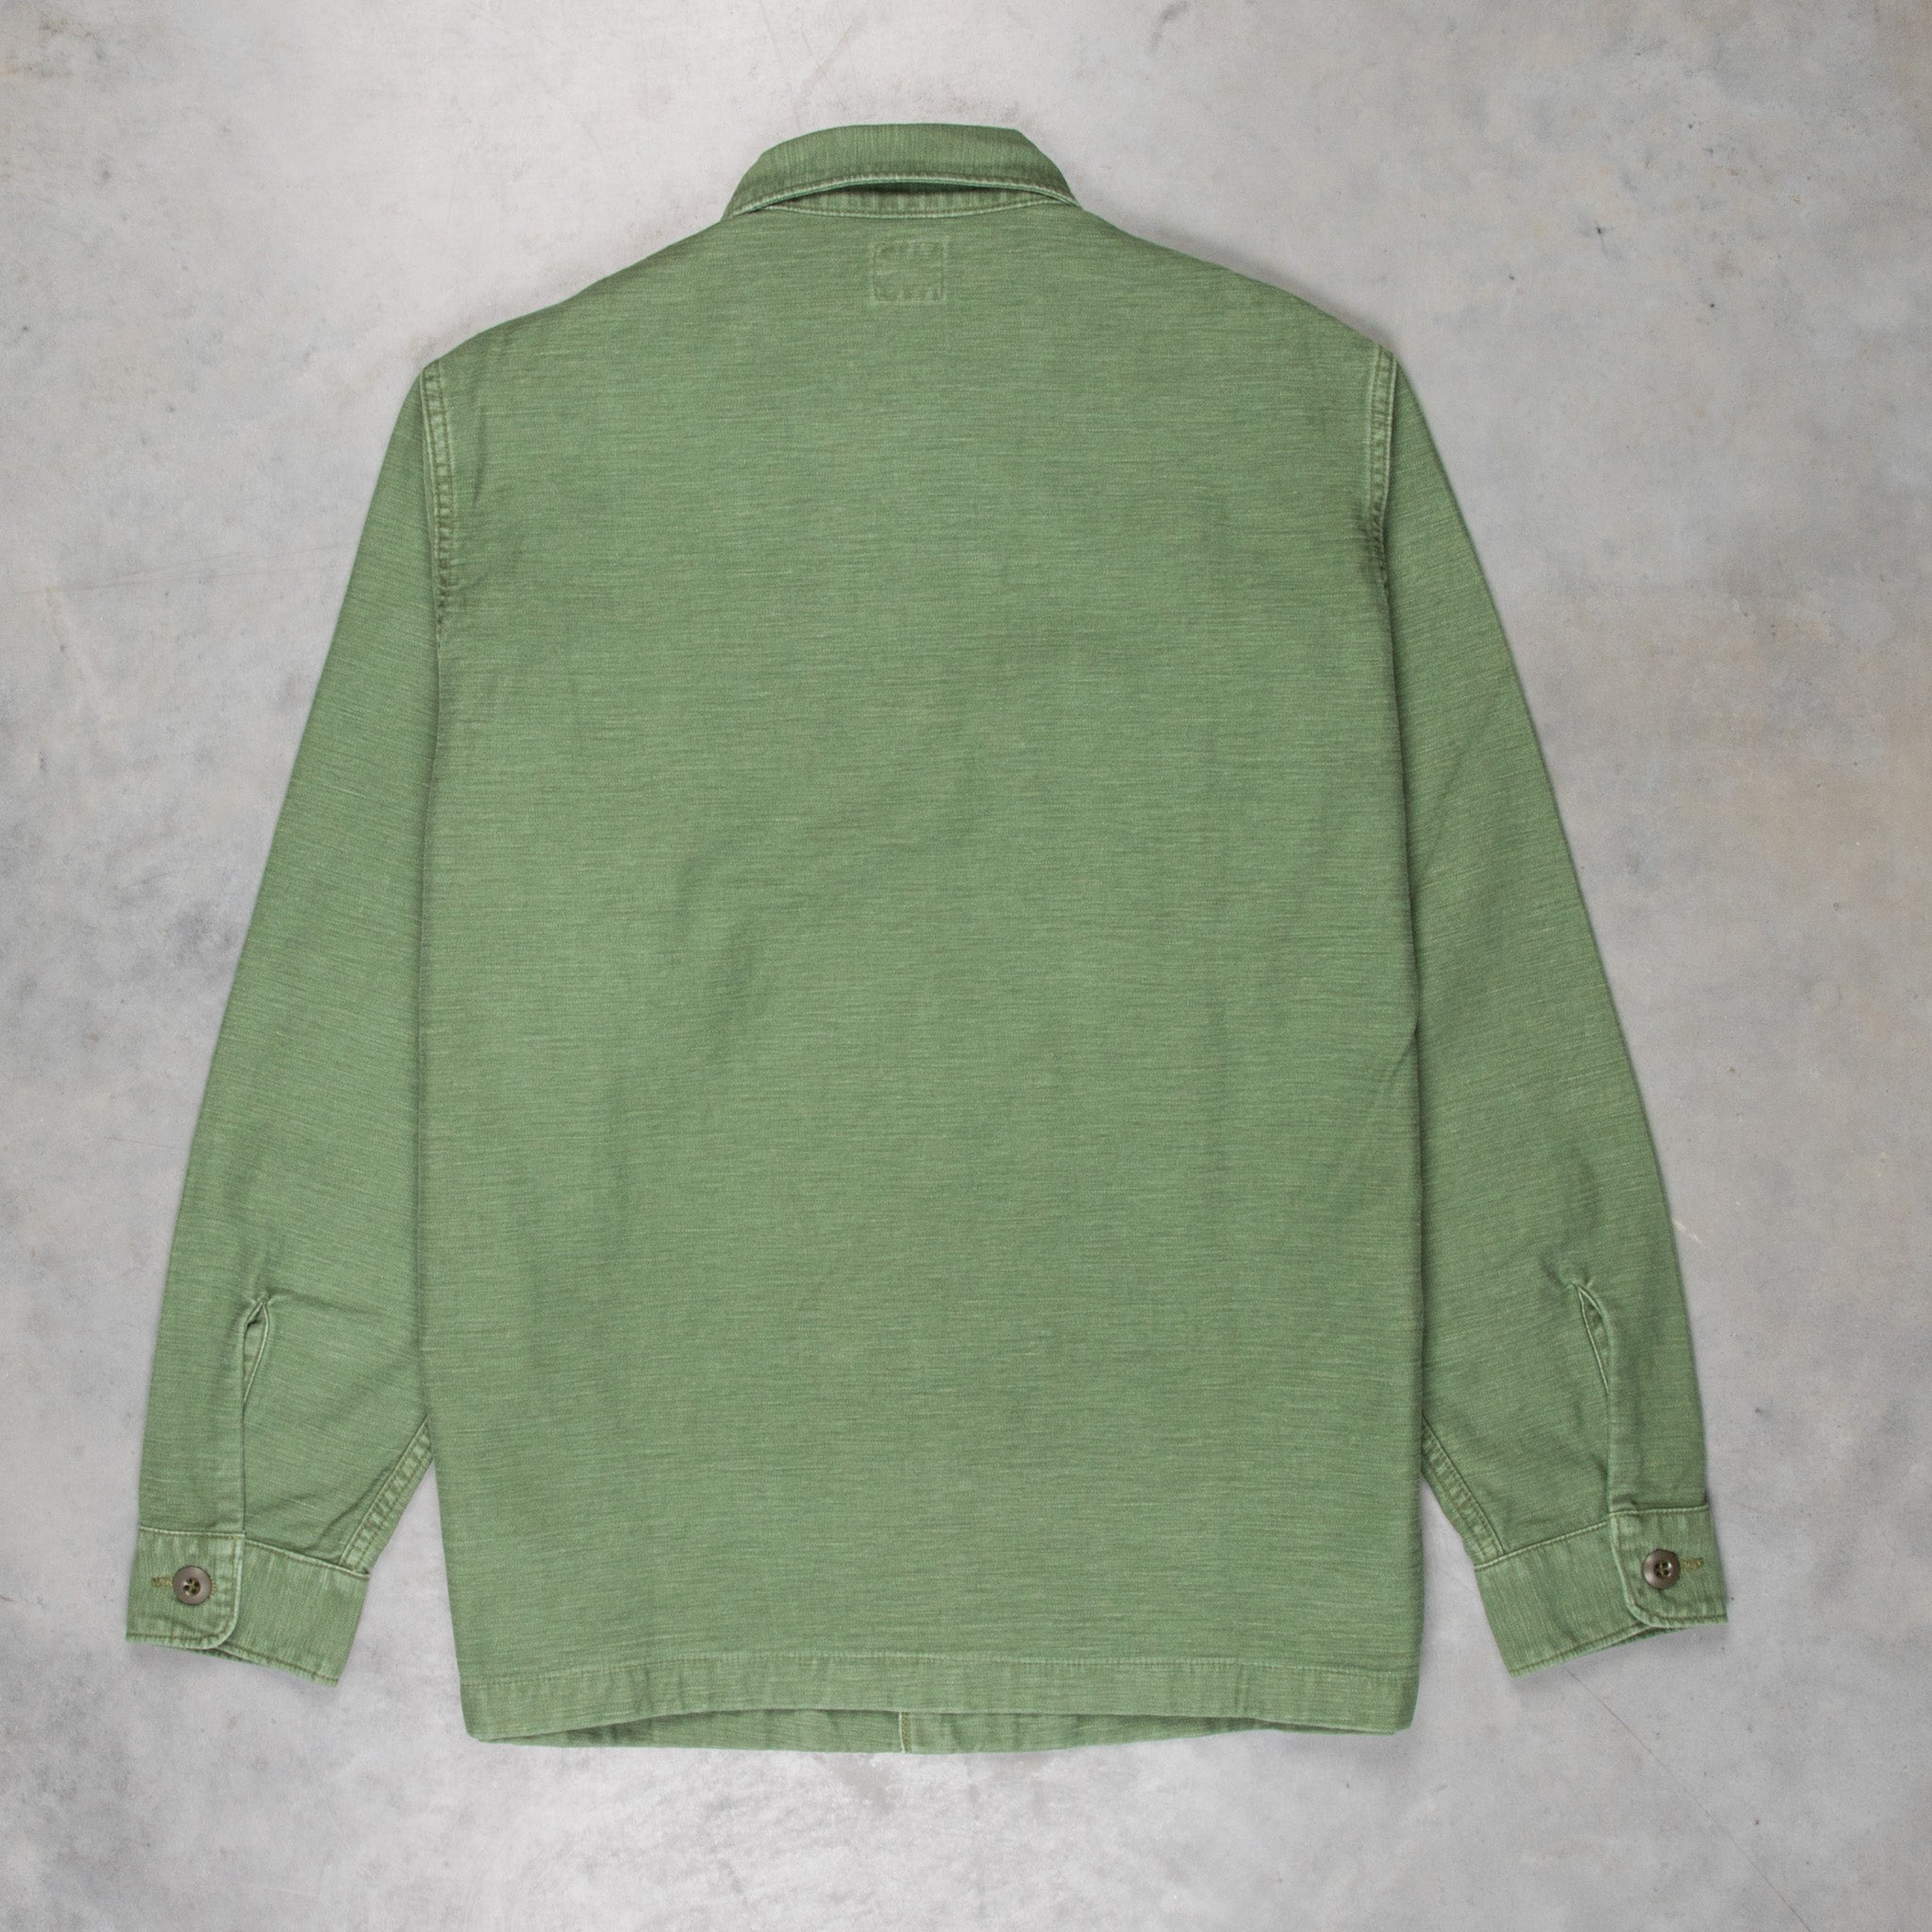 Orslow US army shirt back satin green used